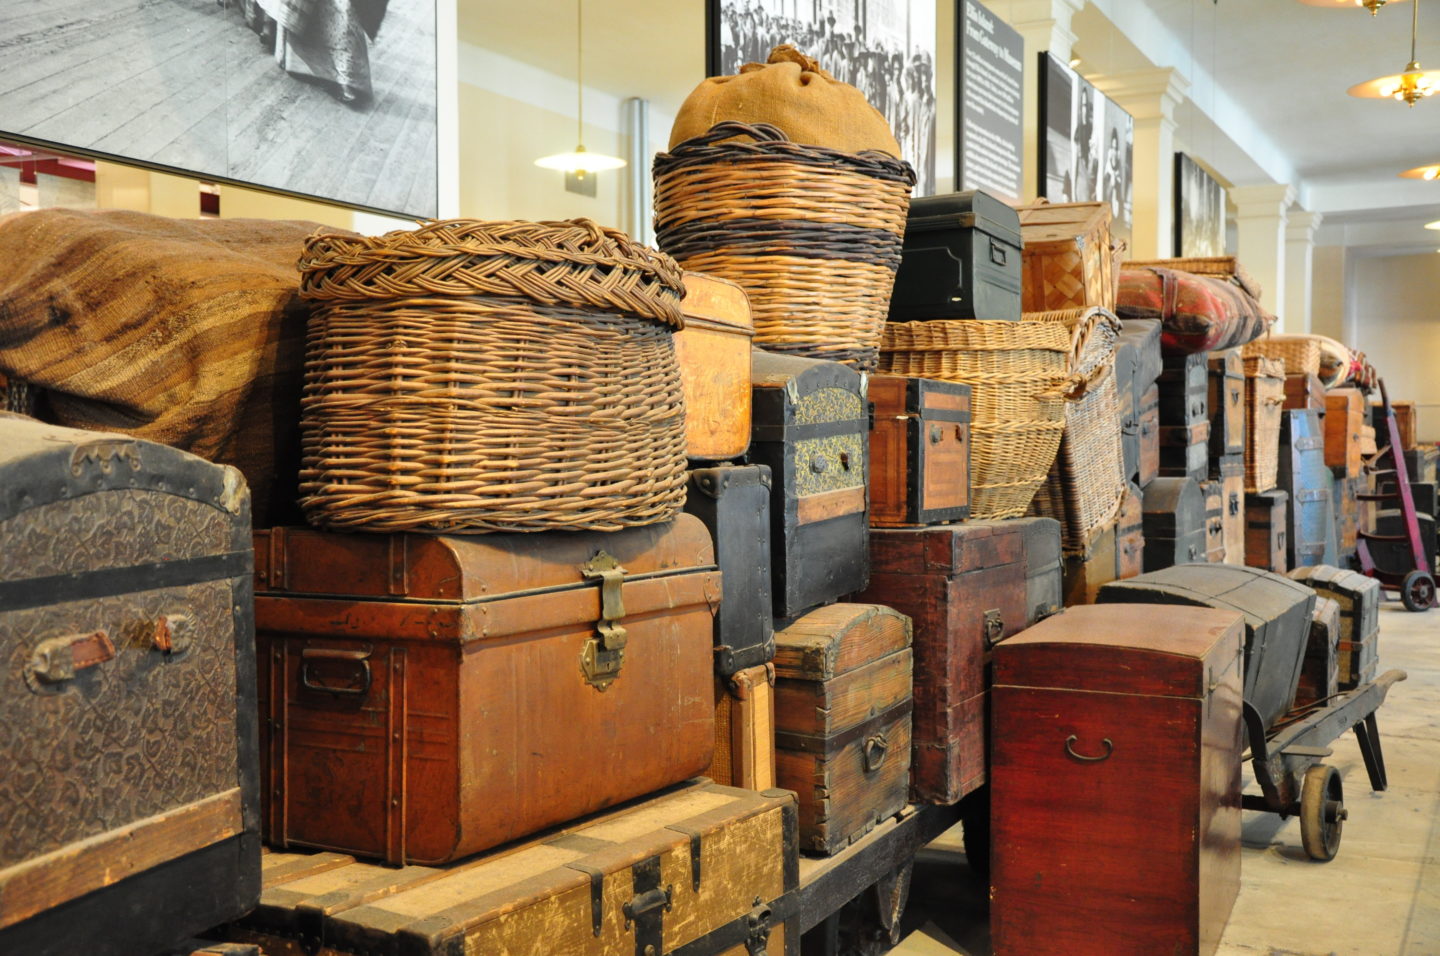 Vintage luggage left by immigrants migrating to the United States at Ellis Island Immigration Museum